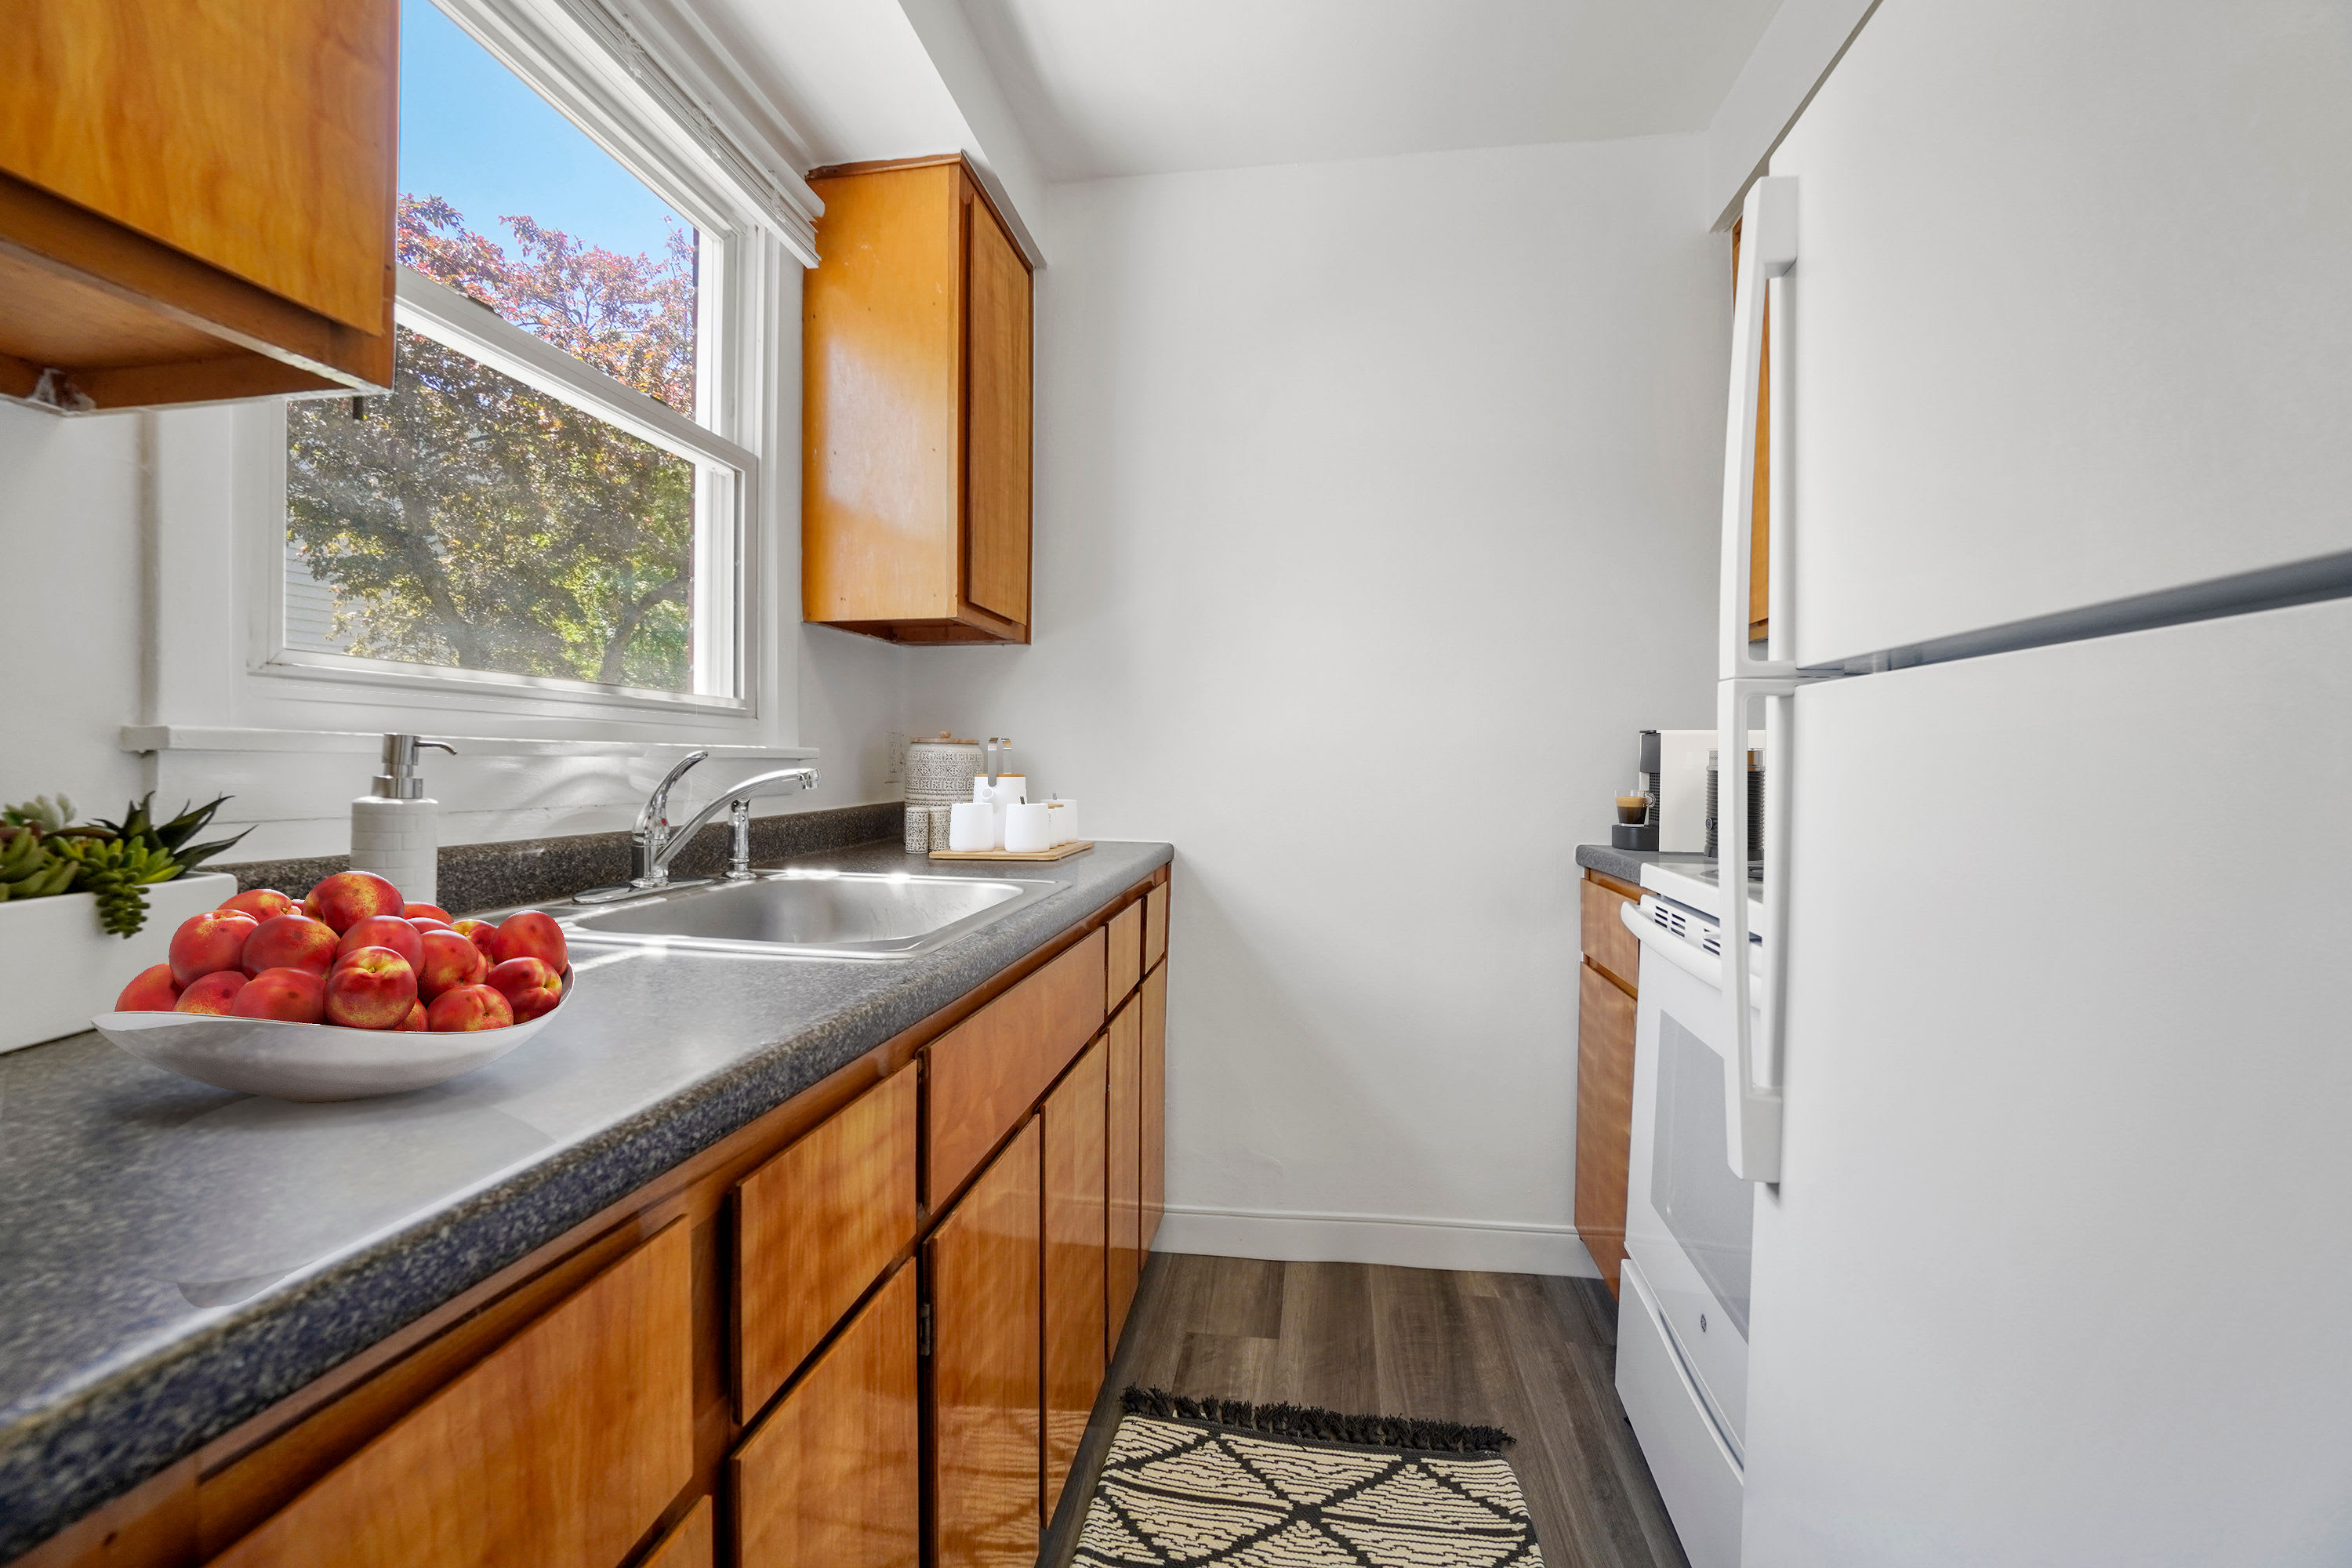 Our Apartments in Roslindale, Massachusetts offer a Kitchen